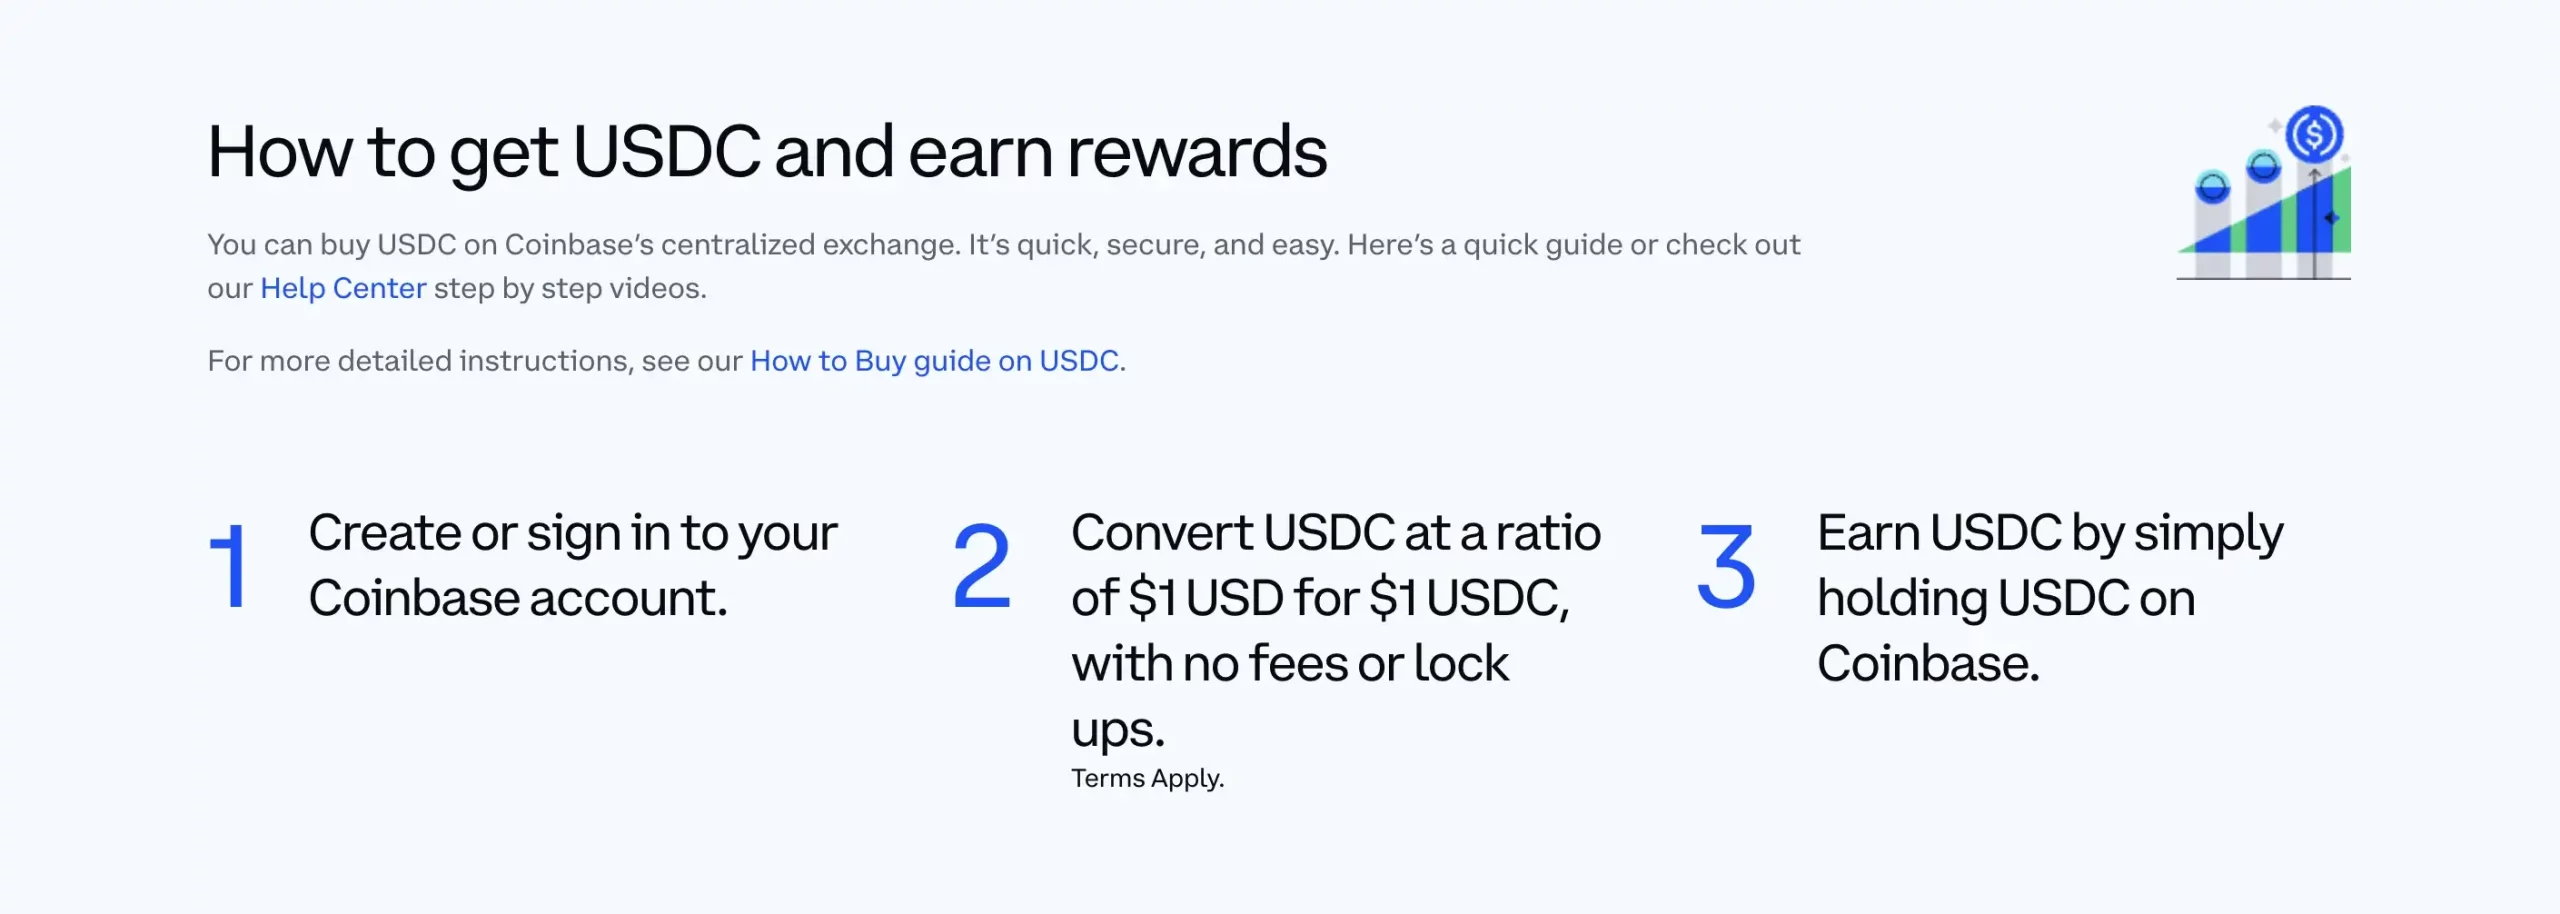 How to get USDC and Earn Rewards